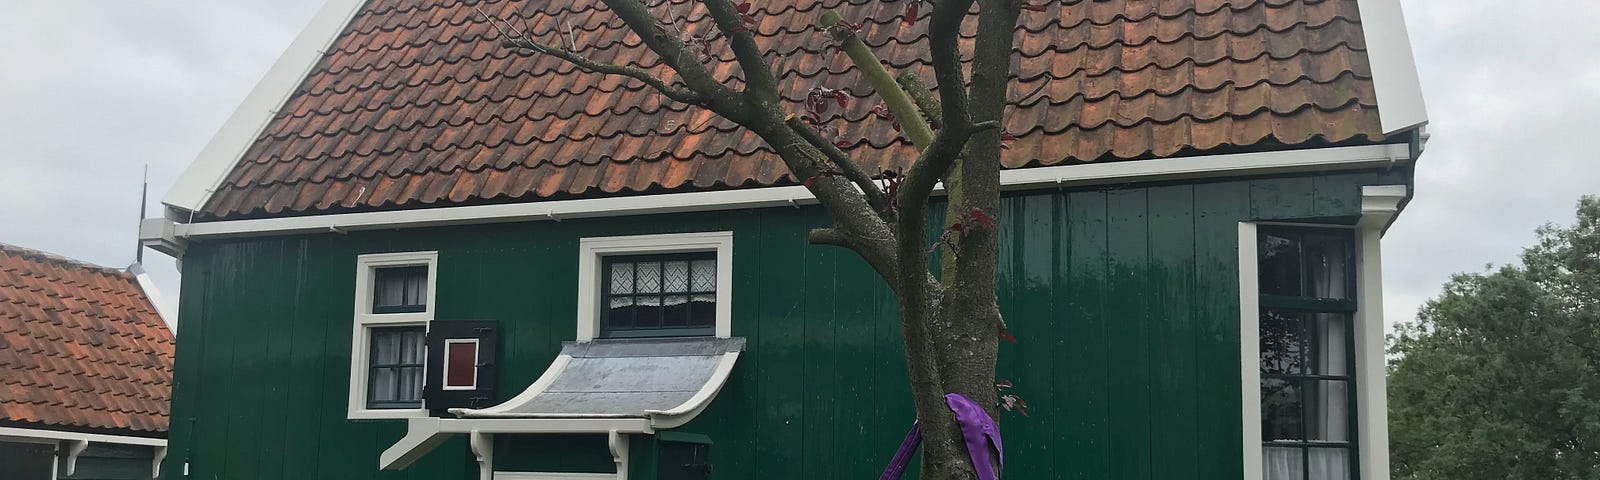 This is a photo of a Dutch house in the traditional Dutch village of Zaanse Schans. The house is green and has a tree in front of it. The roof is made of clay tiles and the entry way has a curved roof over it.